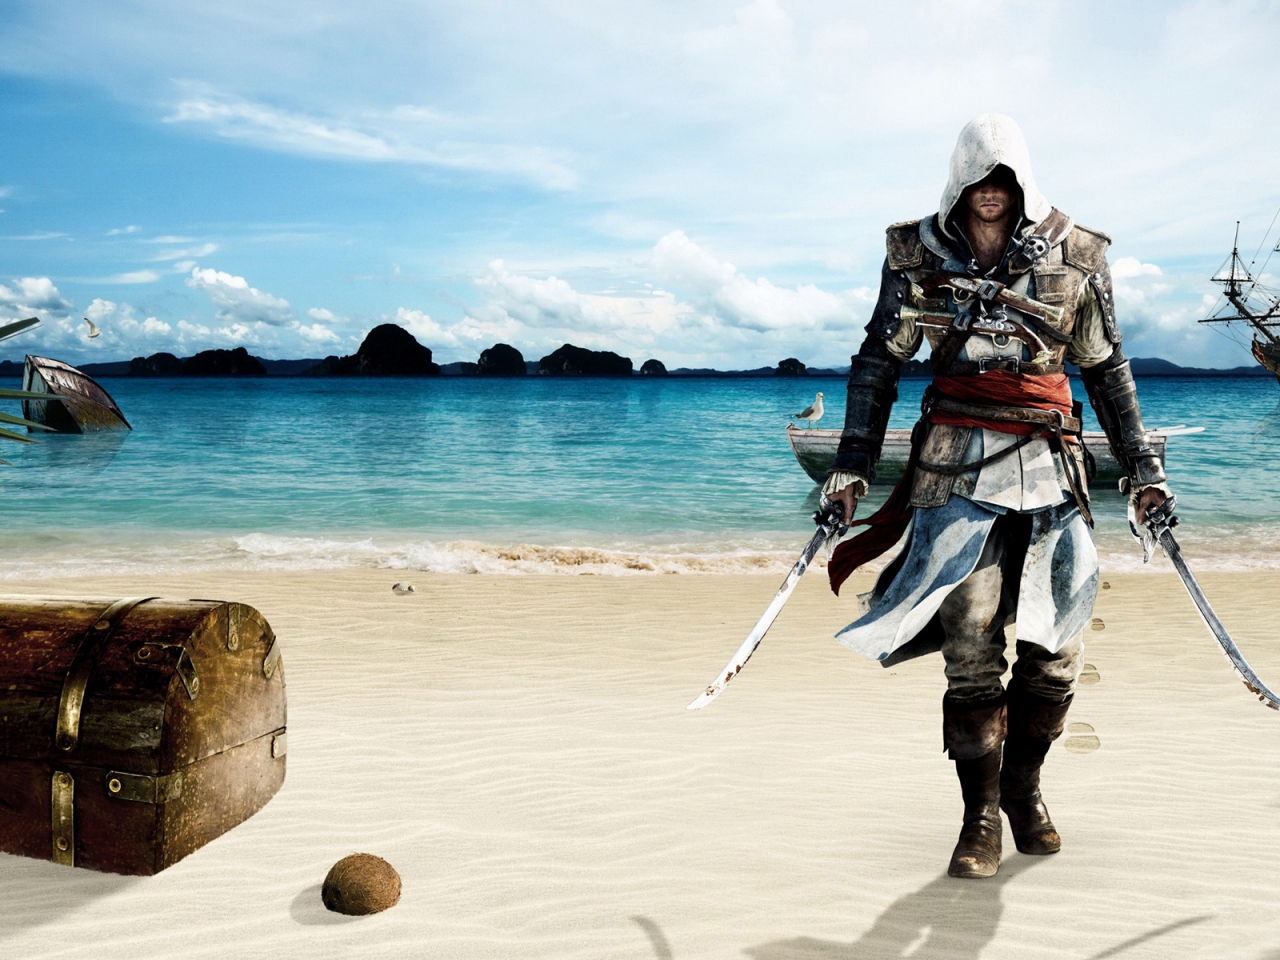 Assassin Creed 4 Beach for 1280 x 960 resolution